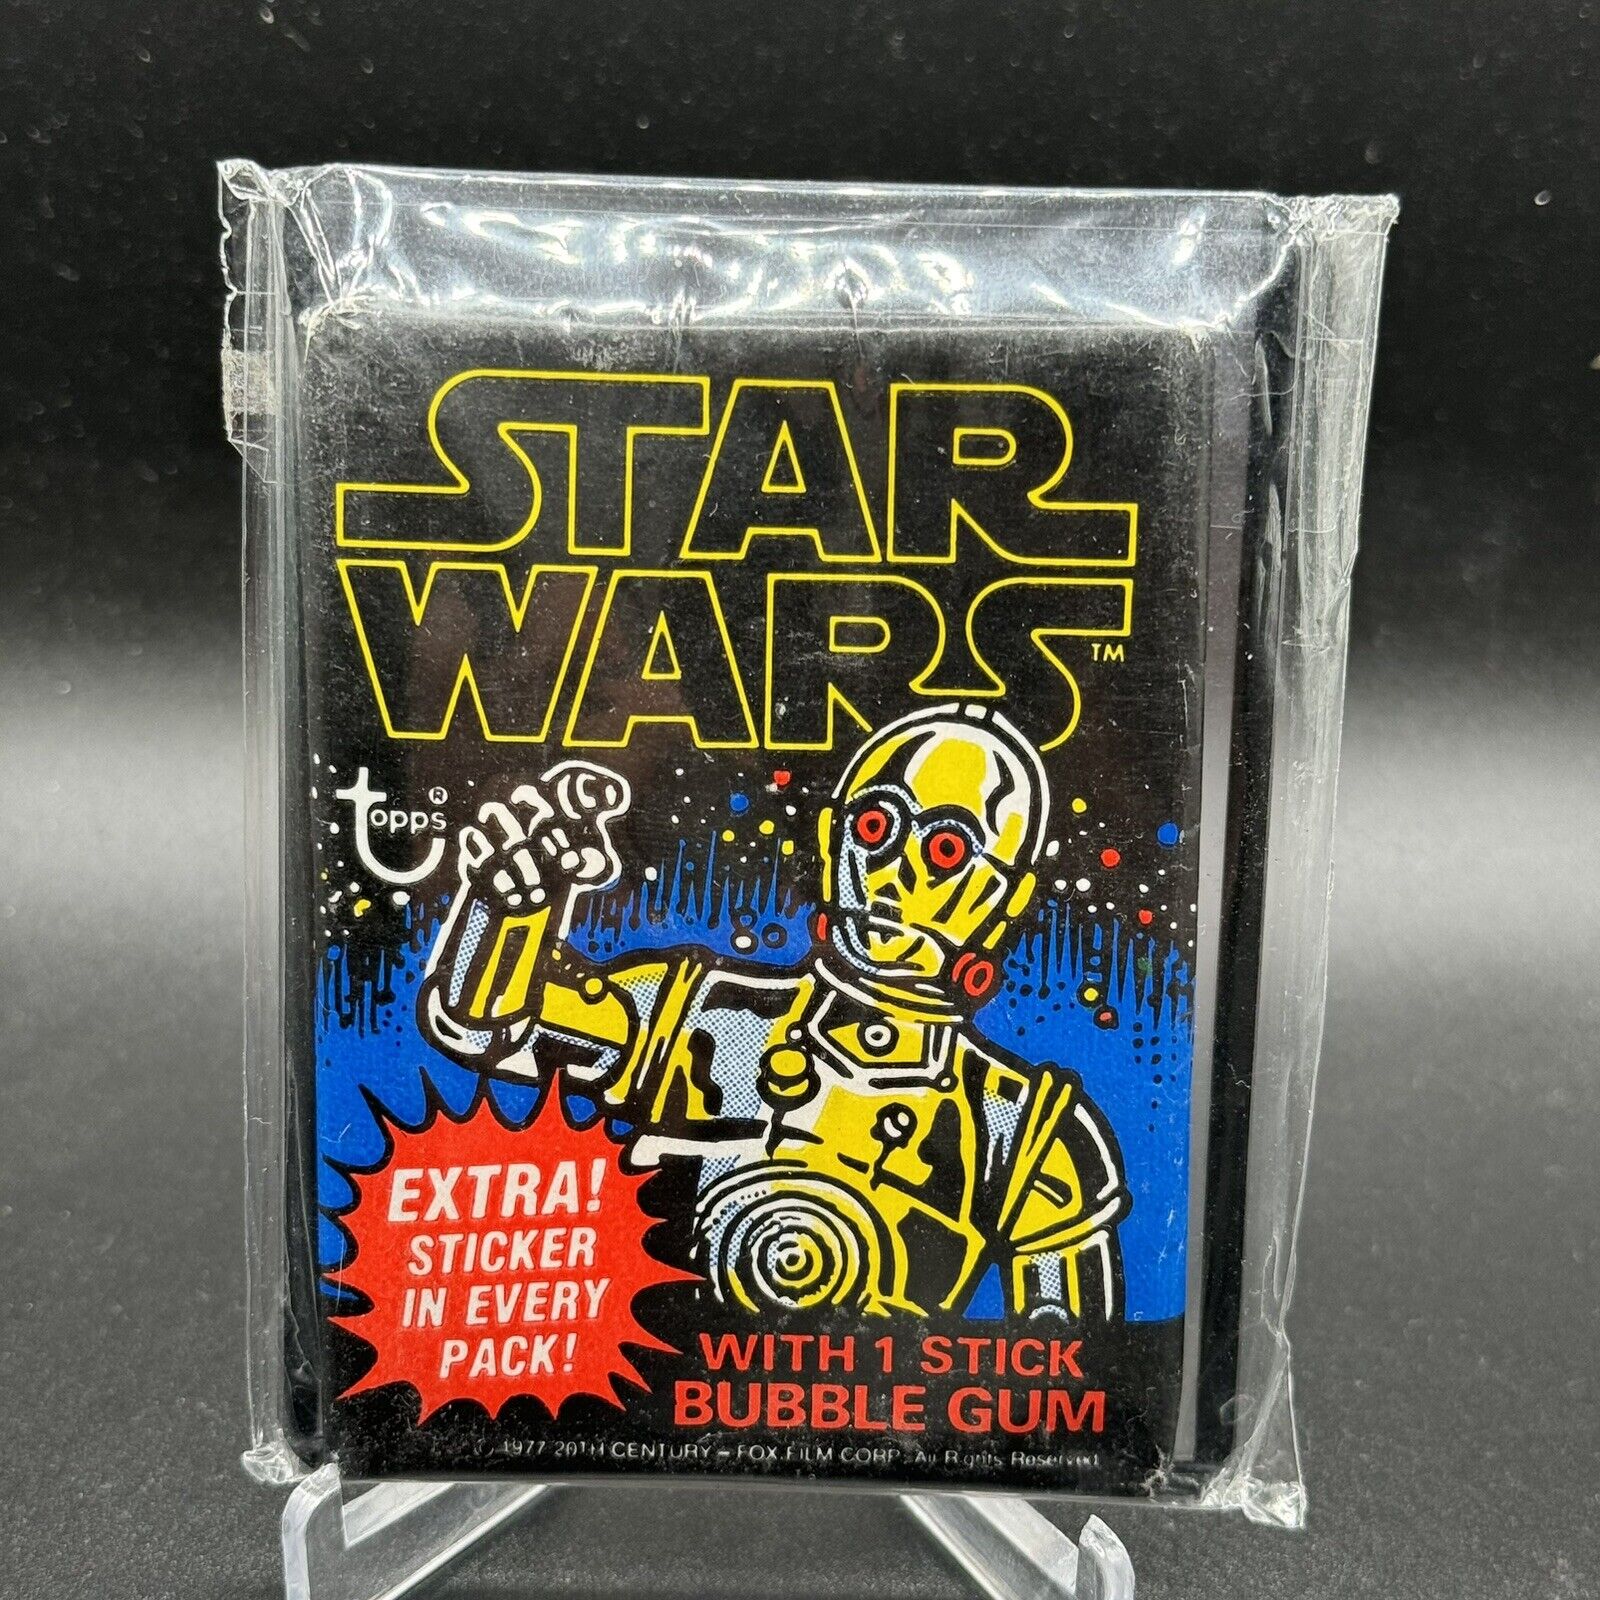 NEW NOS Vintage 1977 Topps Star Wars Series 1 Sealed Wax Pack Cards & Sticker